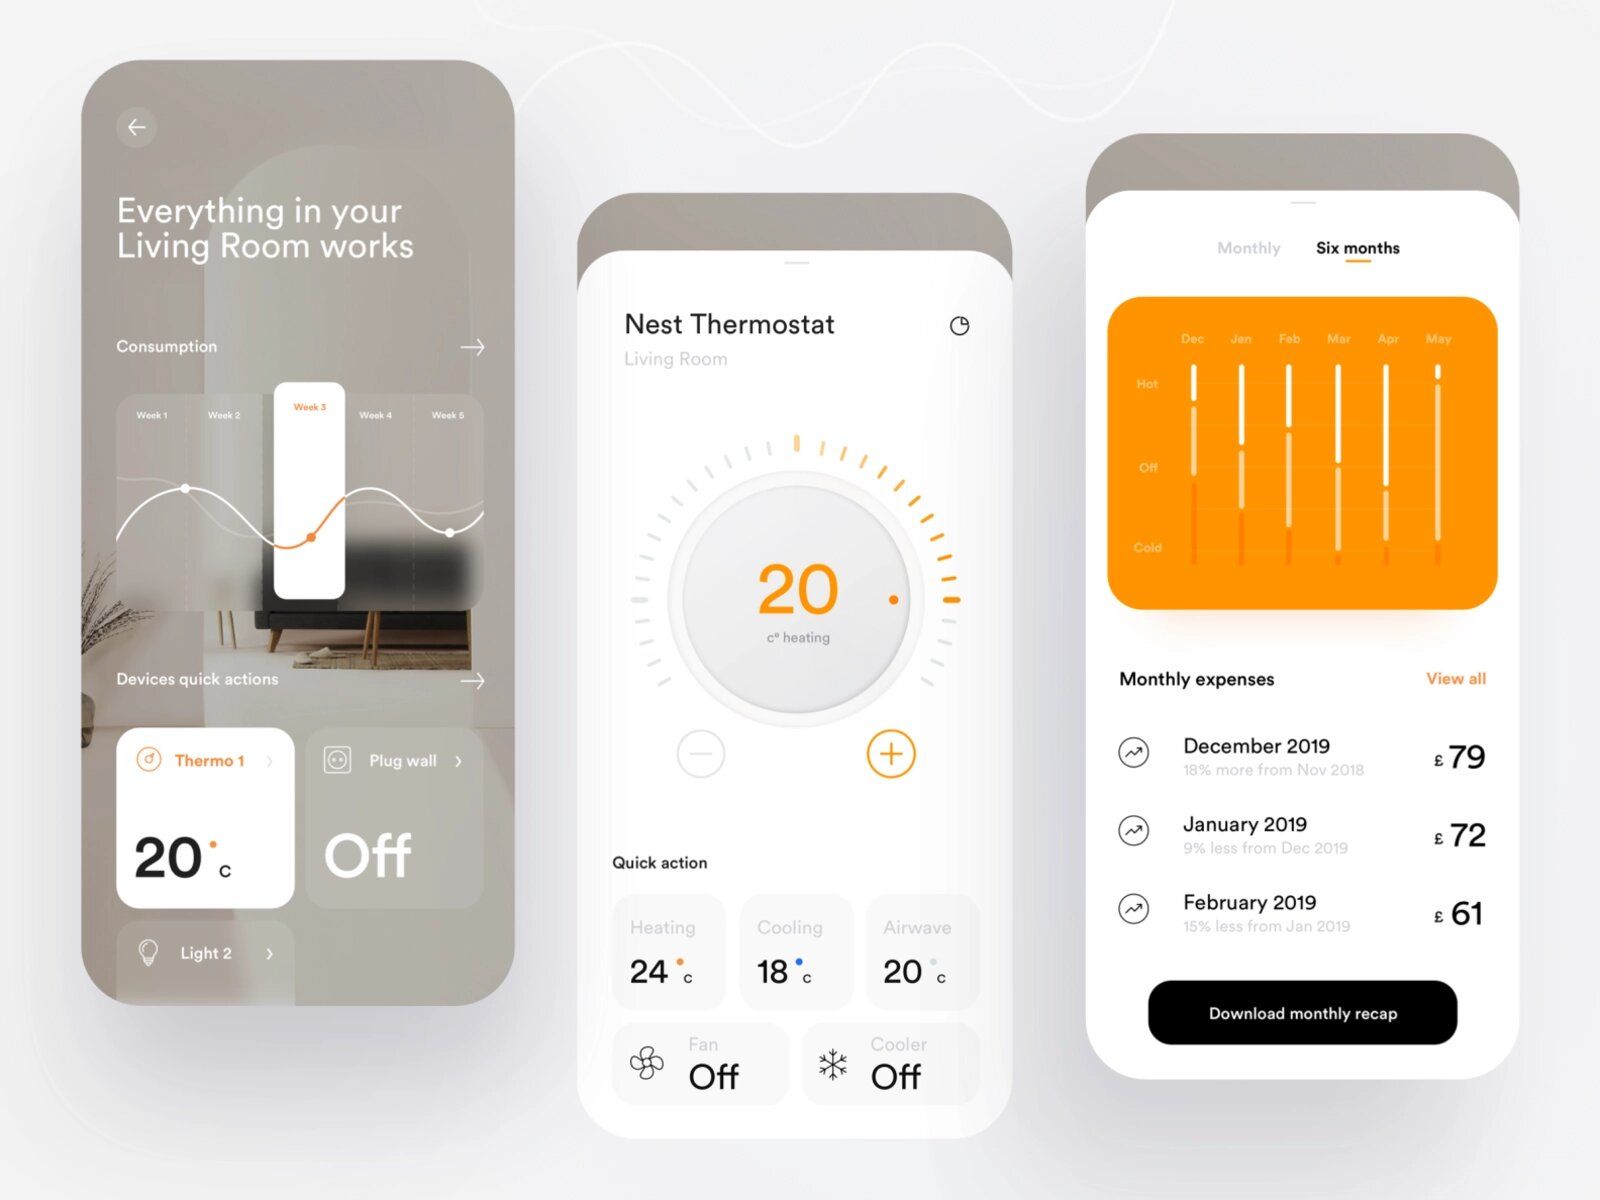 Smart home automation app development for IoT devices in a smart house can be more efficient with a ready-to-use firmware (*image by [Lorenzo Perniciaro](https://dribbble.com/Lorez){ rel="nofollow" target="_blank" .default-md}*)